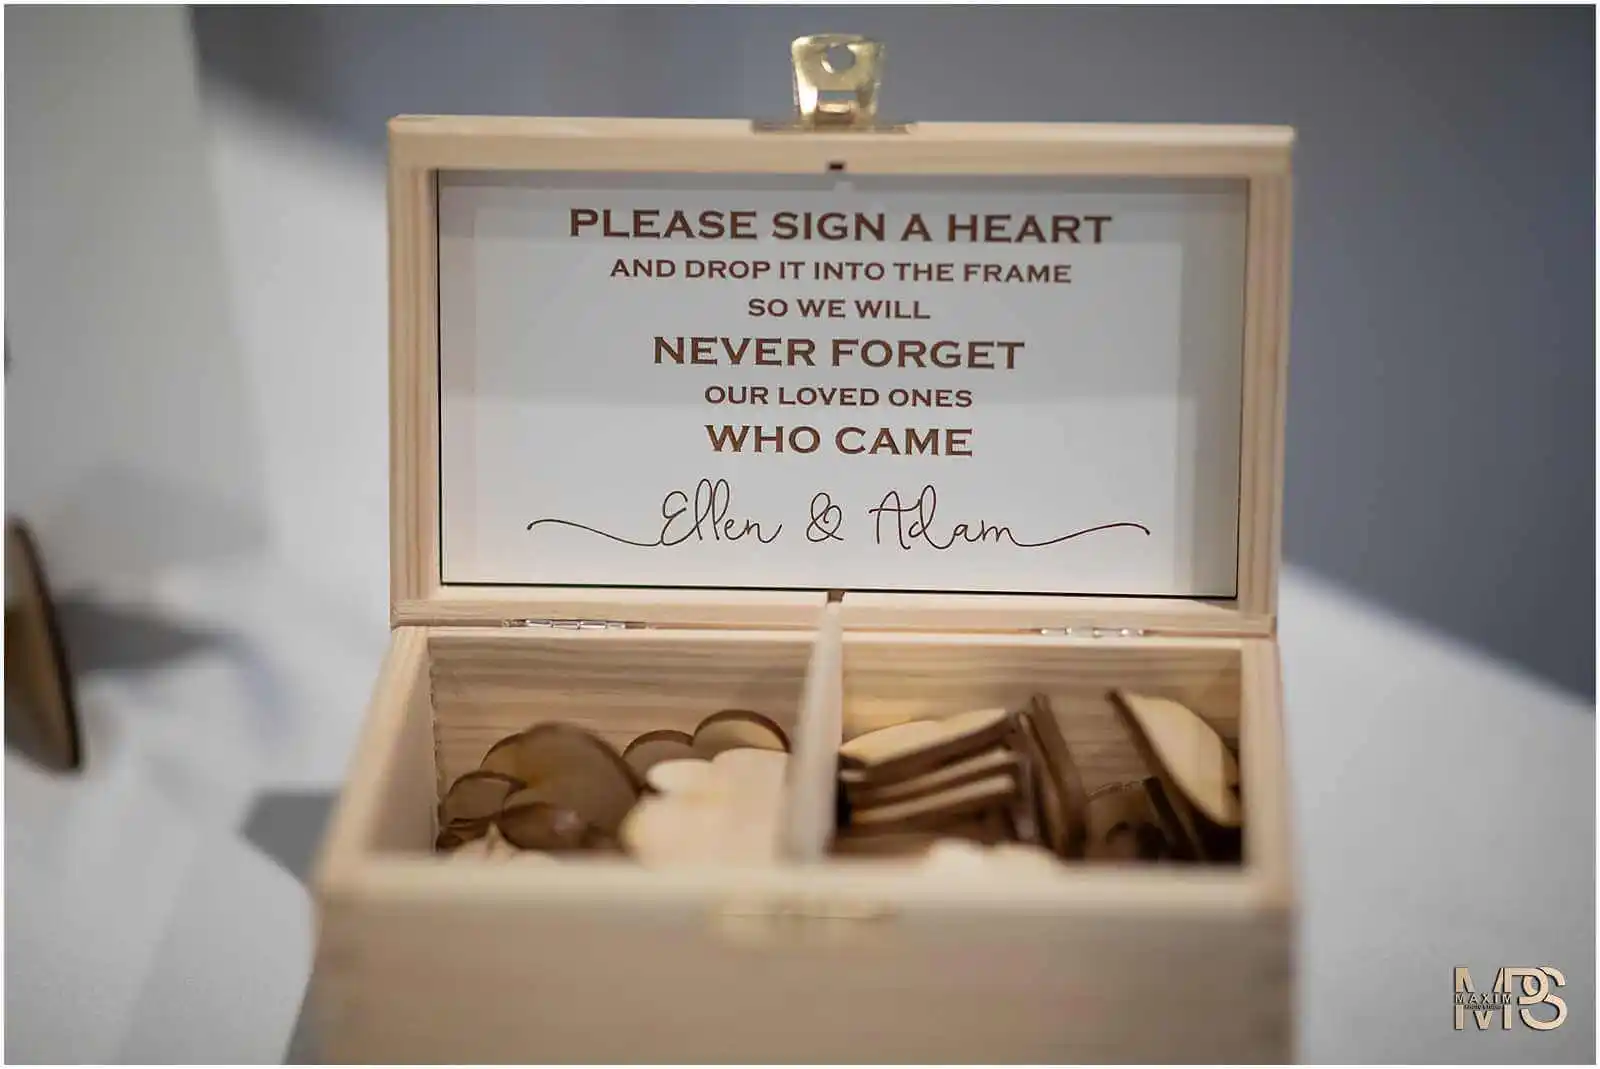 Wooden heart guestbook box for wedding with sign instructions Marriott Rivercenter Covington KY.